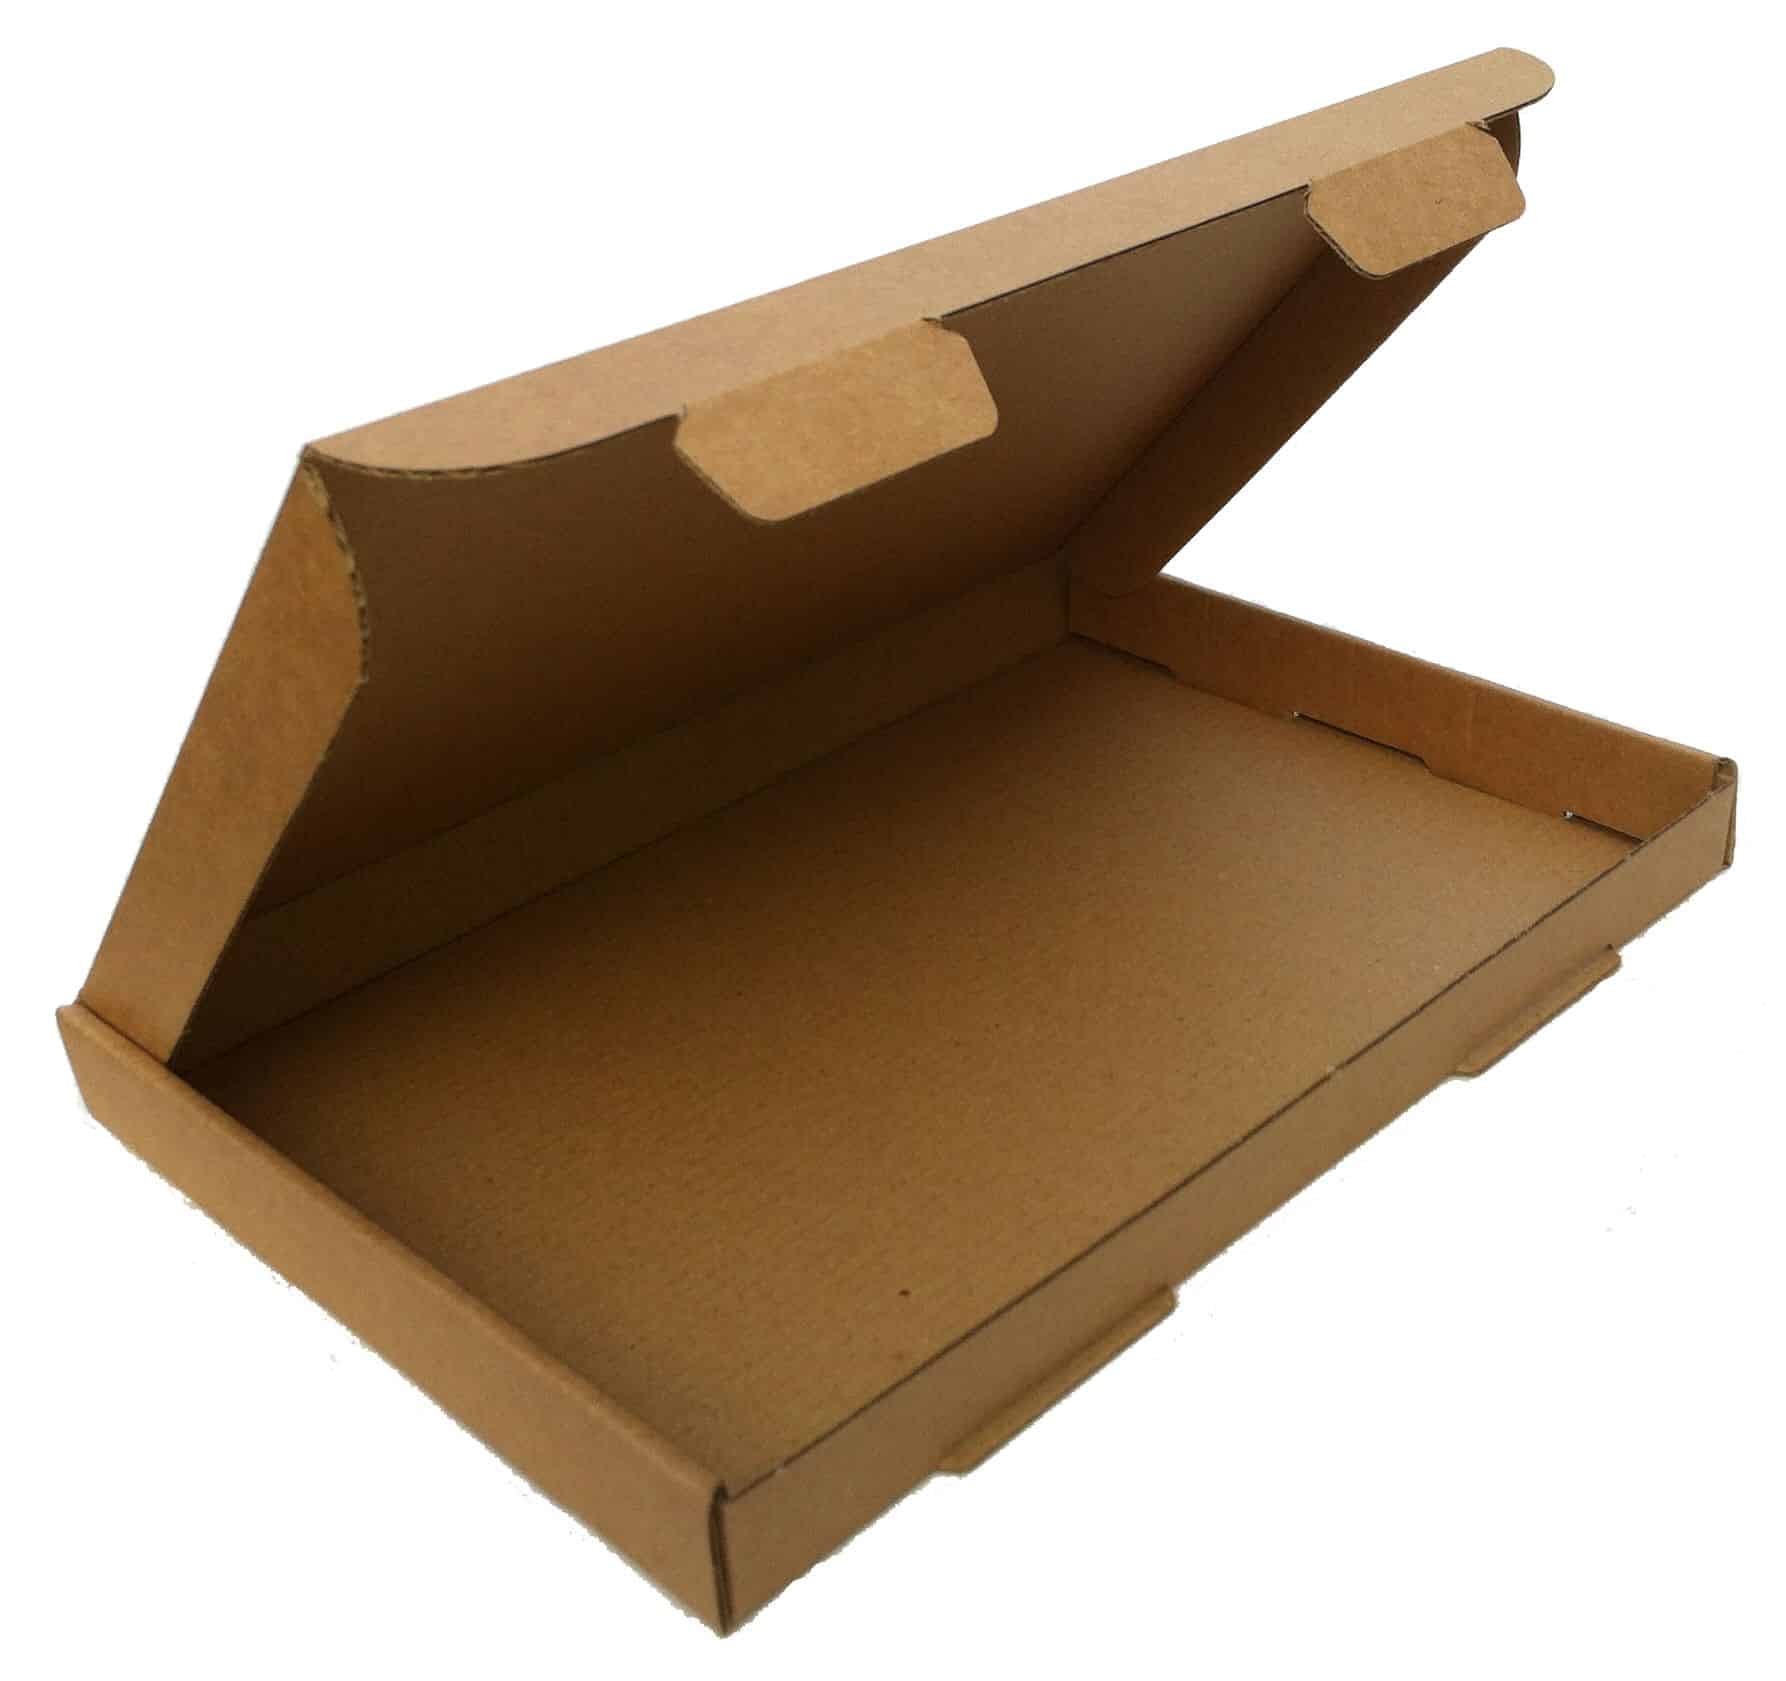 9x6x2 Inch Shipping Boxes for Small Business 50 Pack Packaging Boxes for Small Business Corrugated Cardboard Boxes for Packaging 